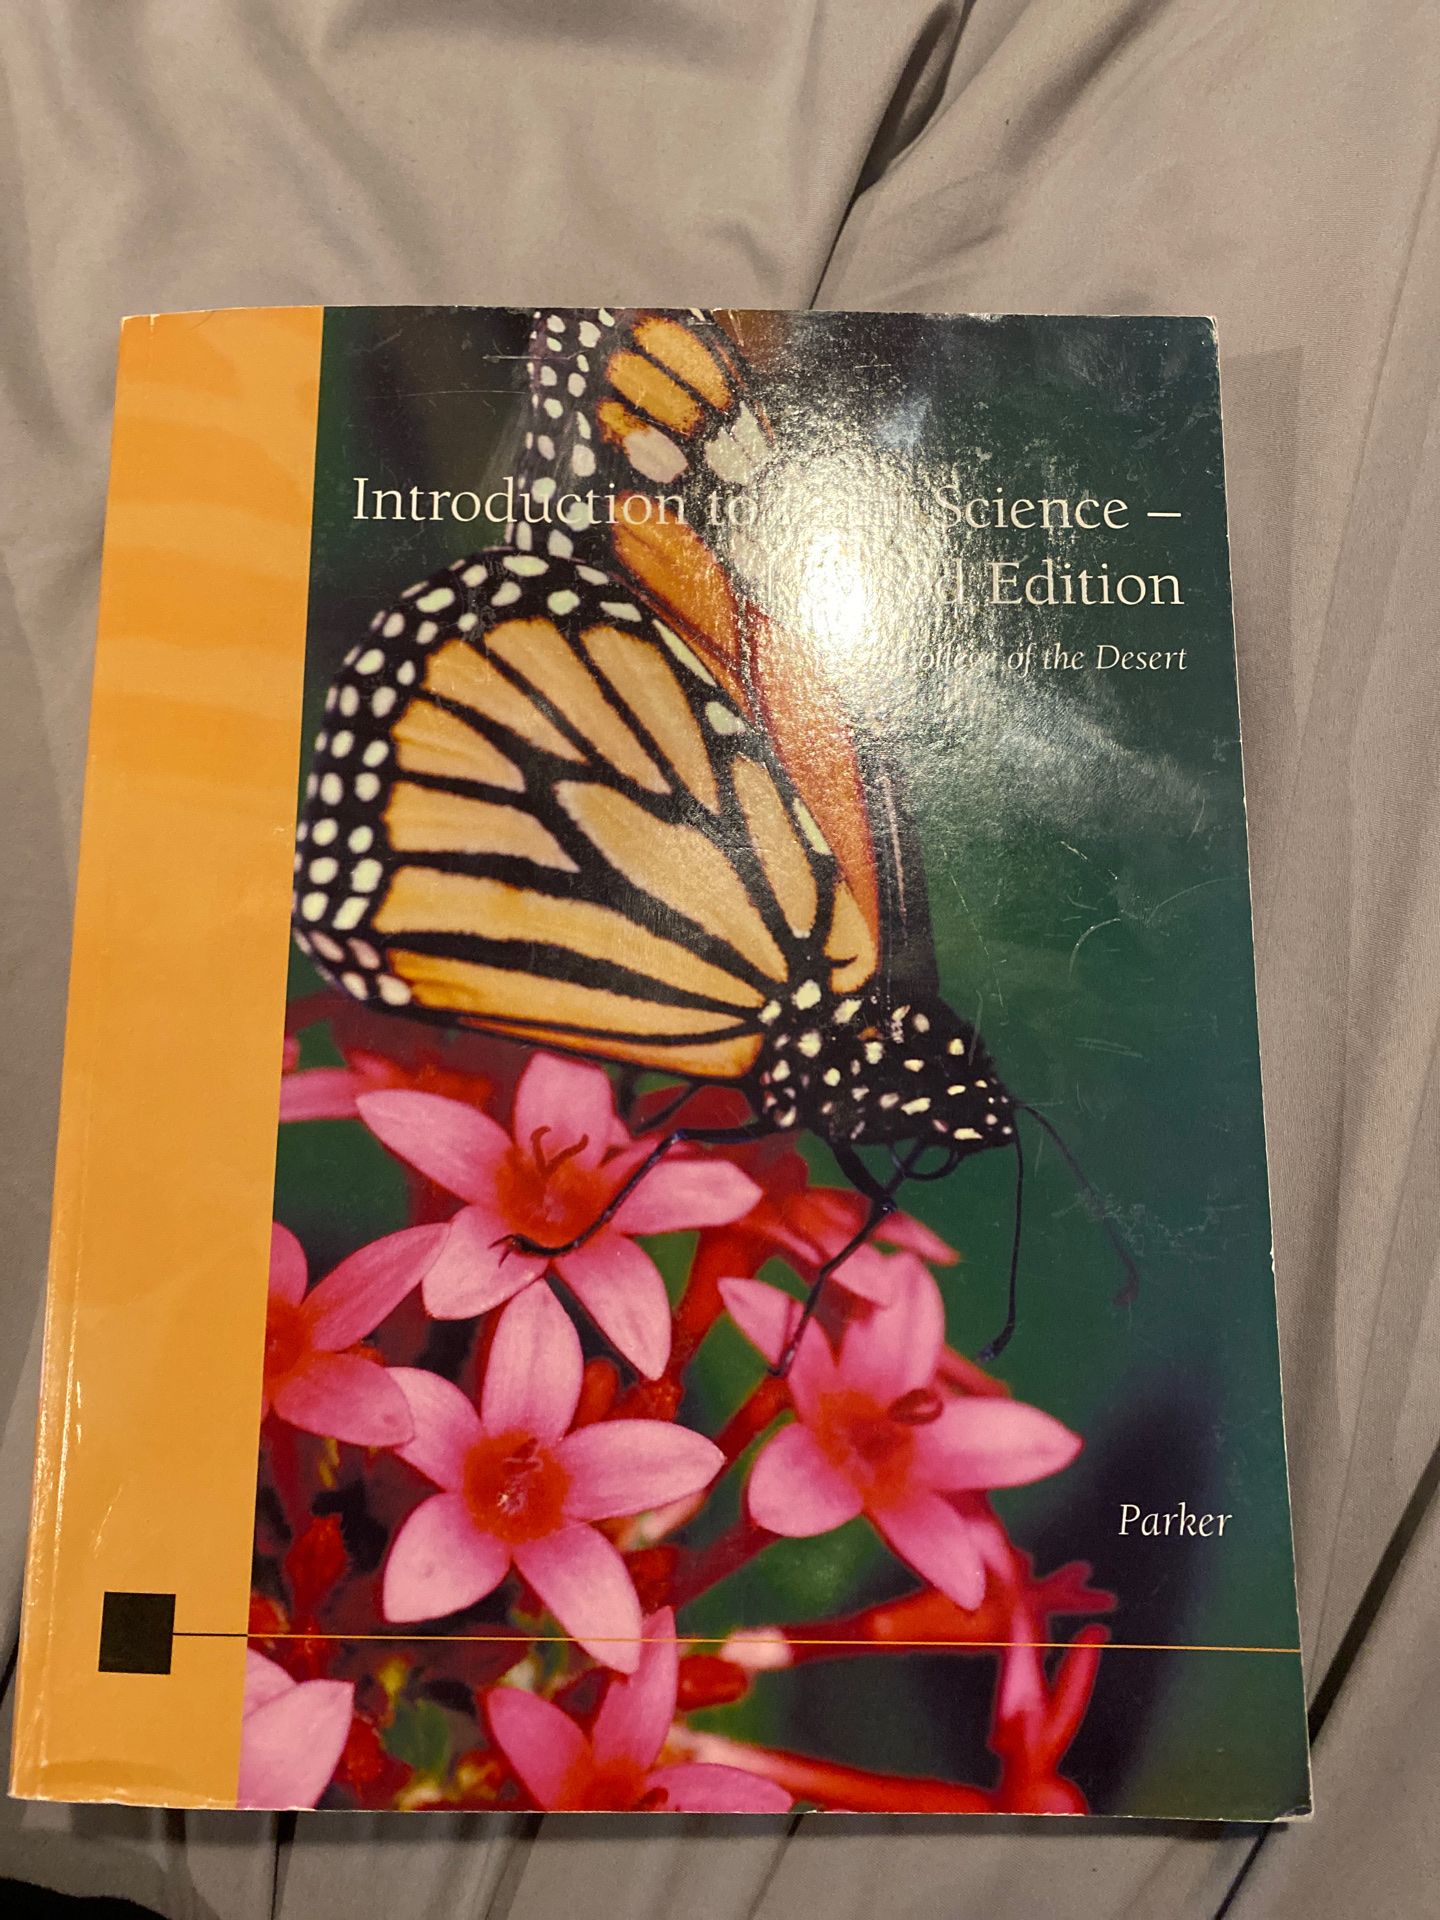 Introduction to plant science revised edition 2007